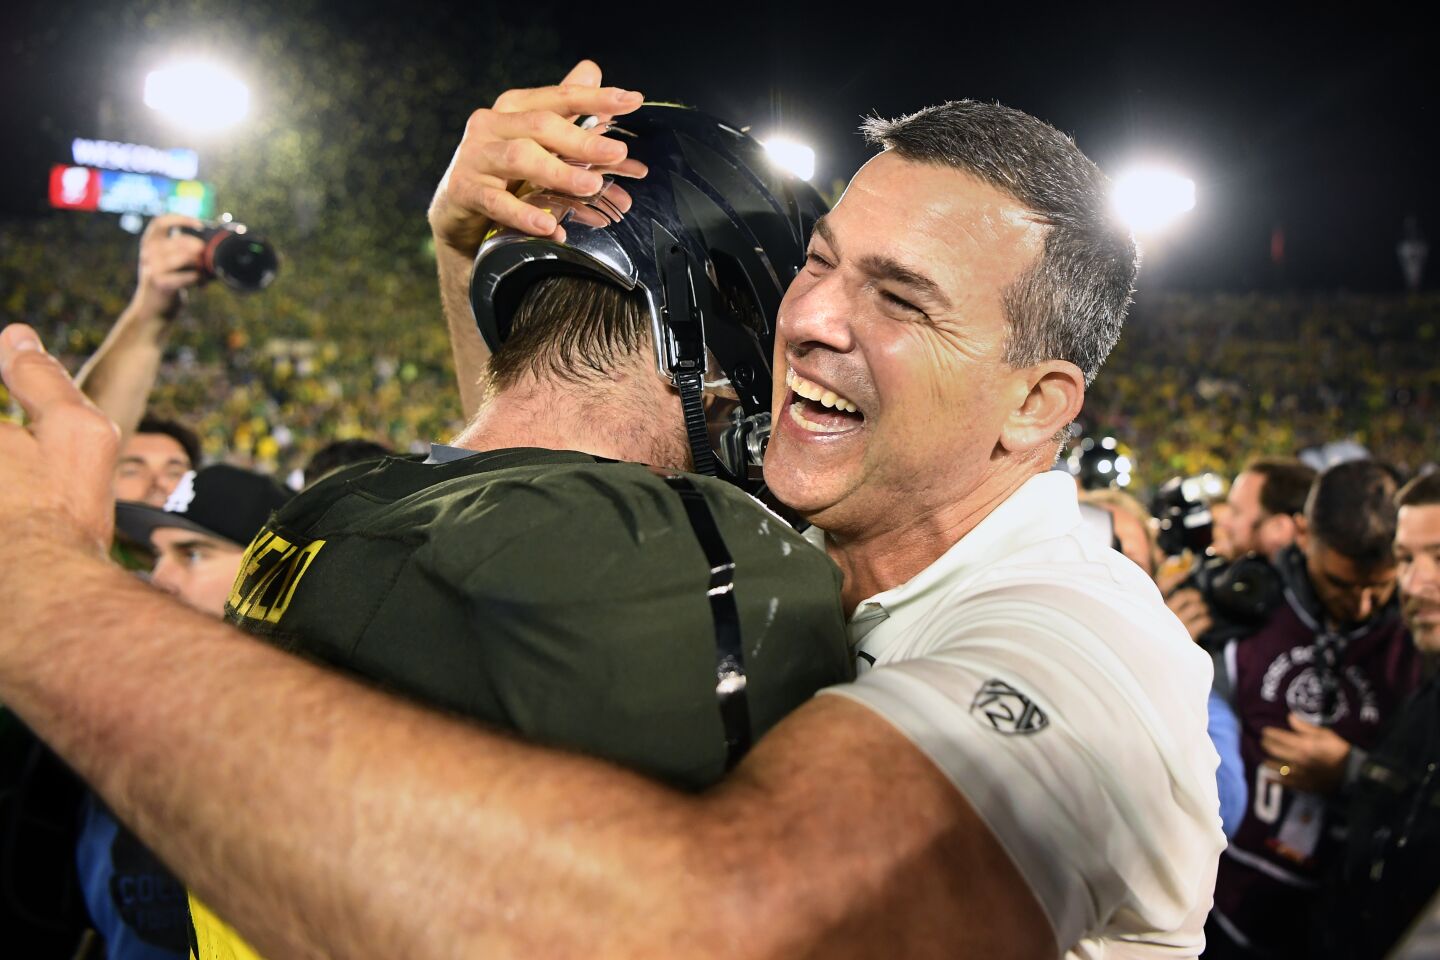 Oregon coach Mario Cristobal hugs a player after the Ducks' win over Wisconsin in the Rose Bowl.